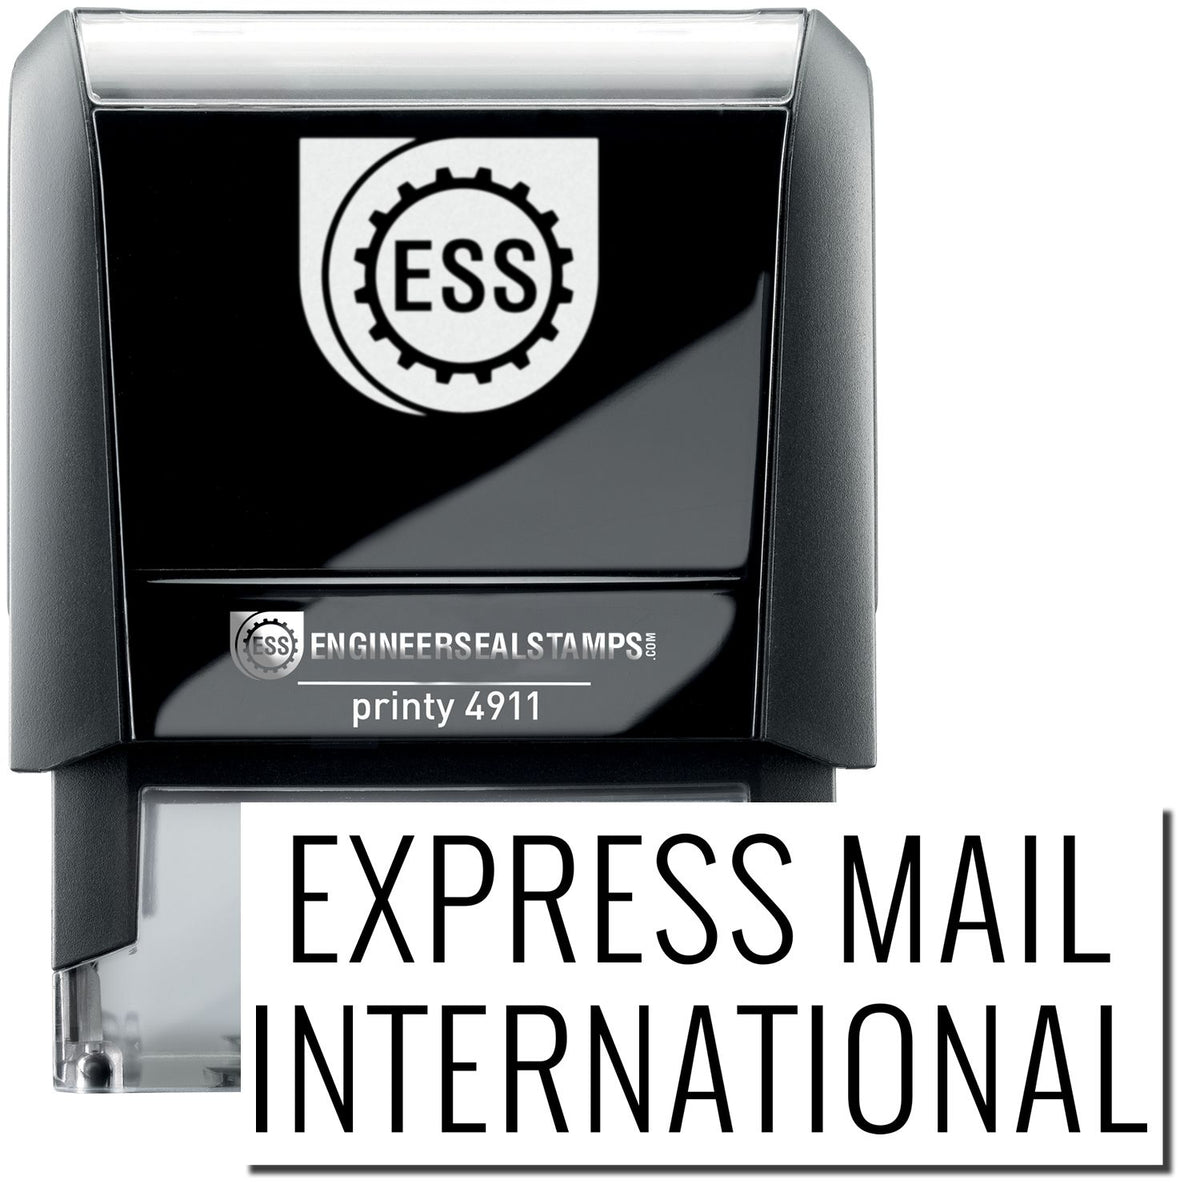 A self-inking stamp with a stamped image showing how the text &quot;EXPRESS MAIL INTERNATIONAL&quot; is displayed after stamping.